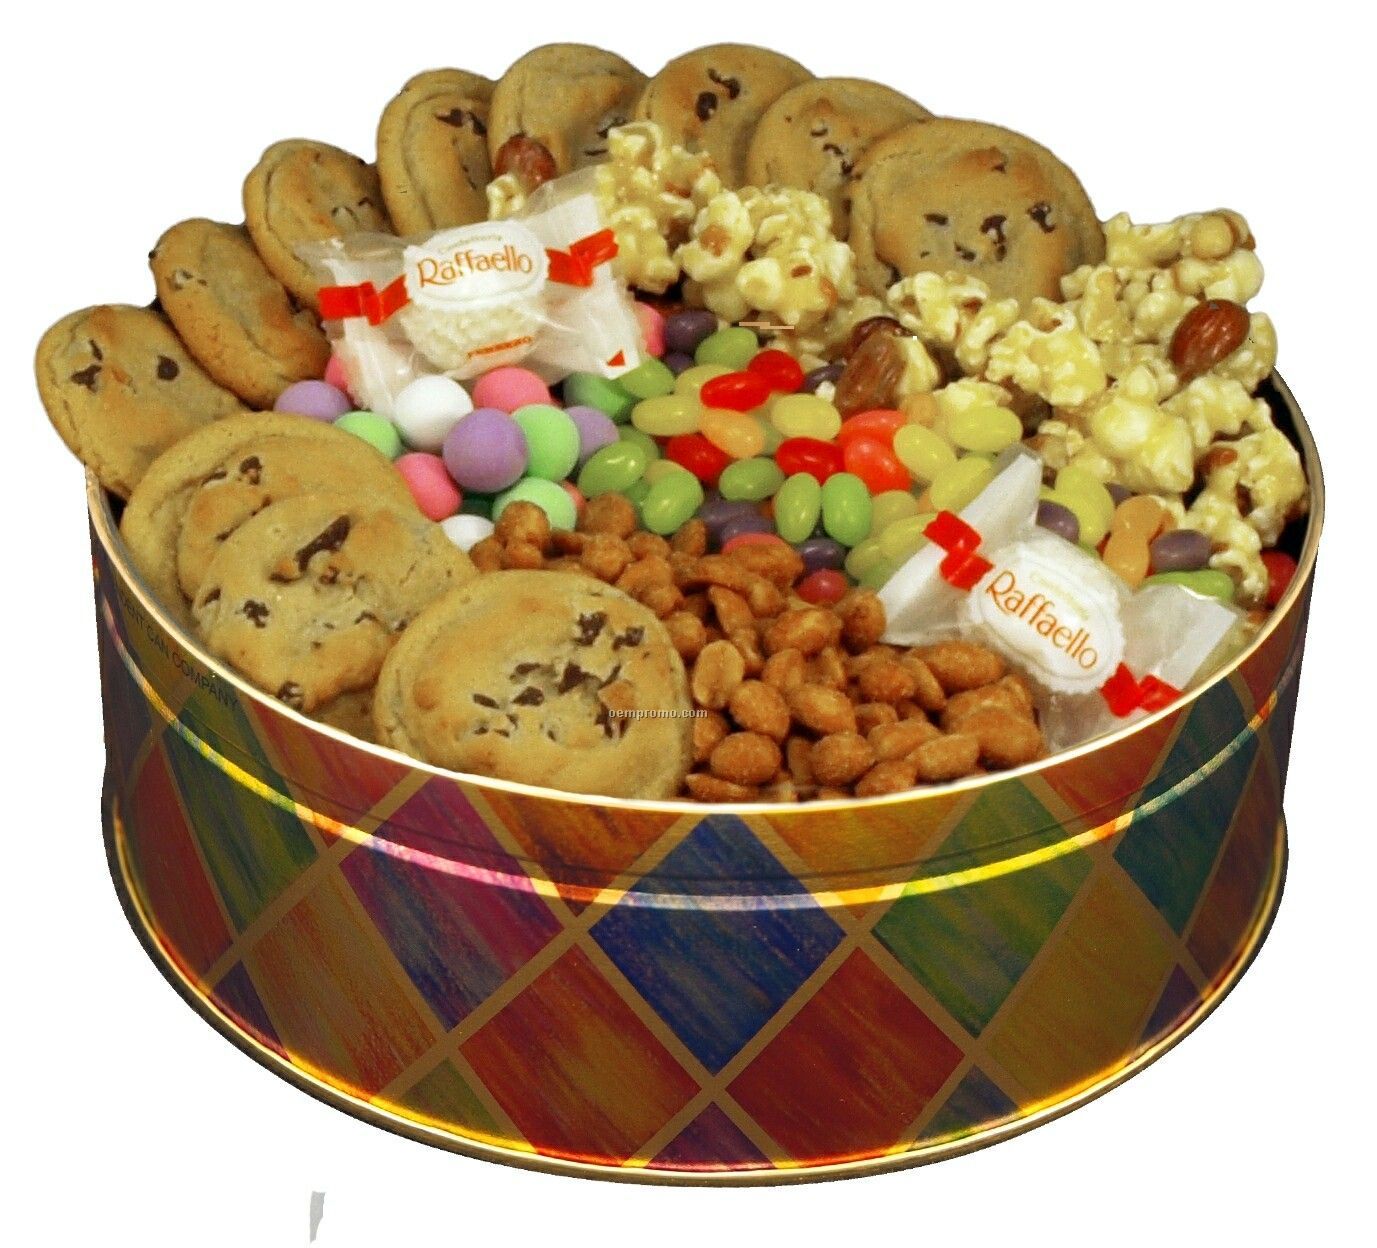 Snack Attack Assortment (27 Oz. In Regular Canister)